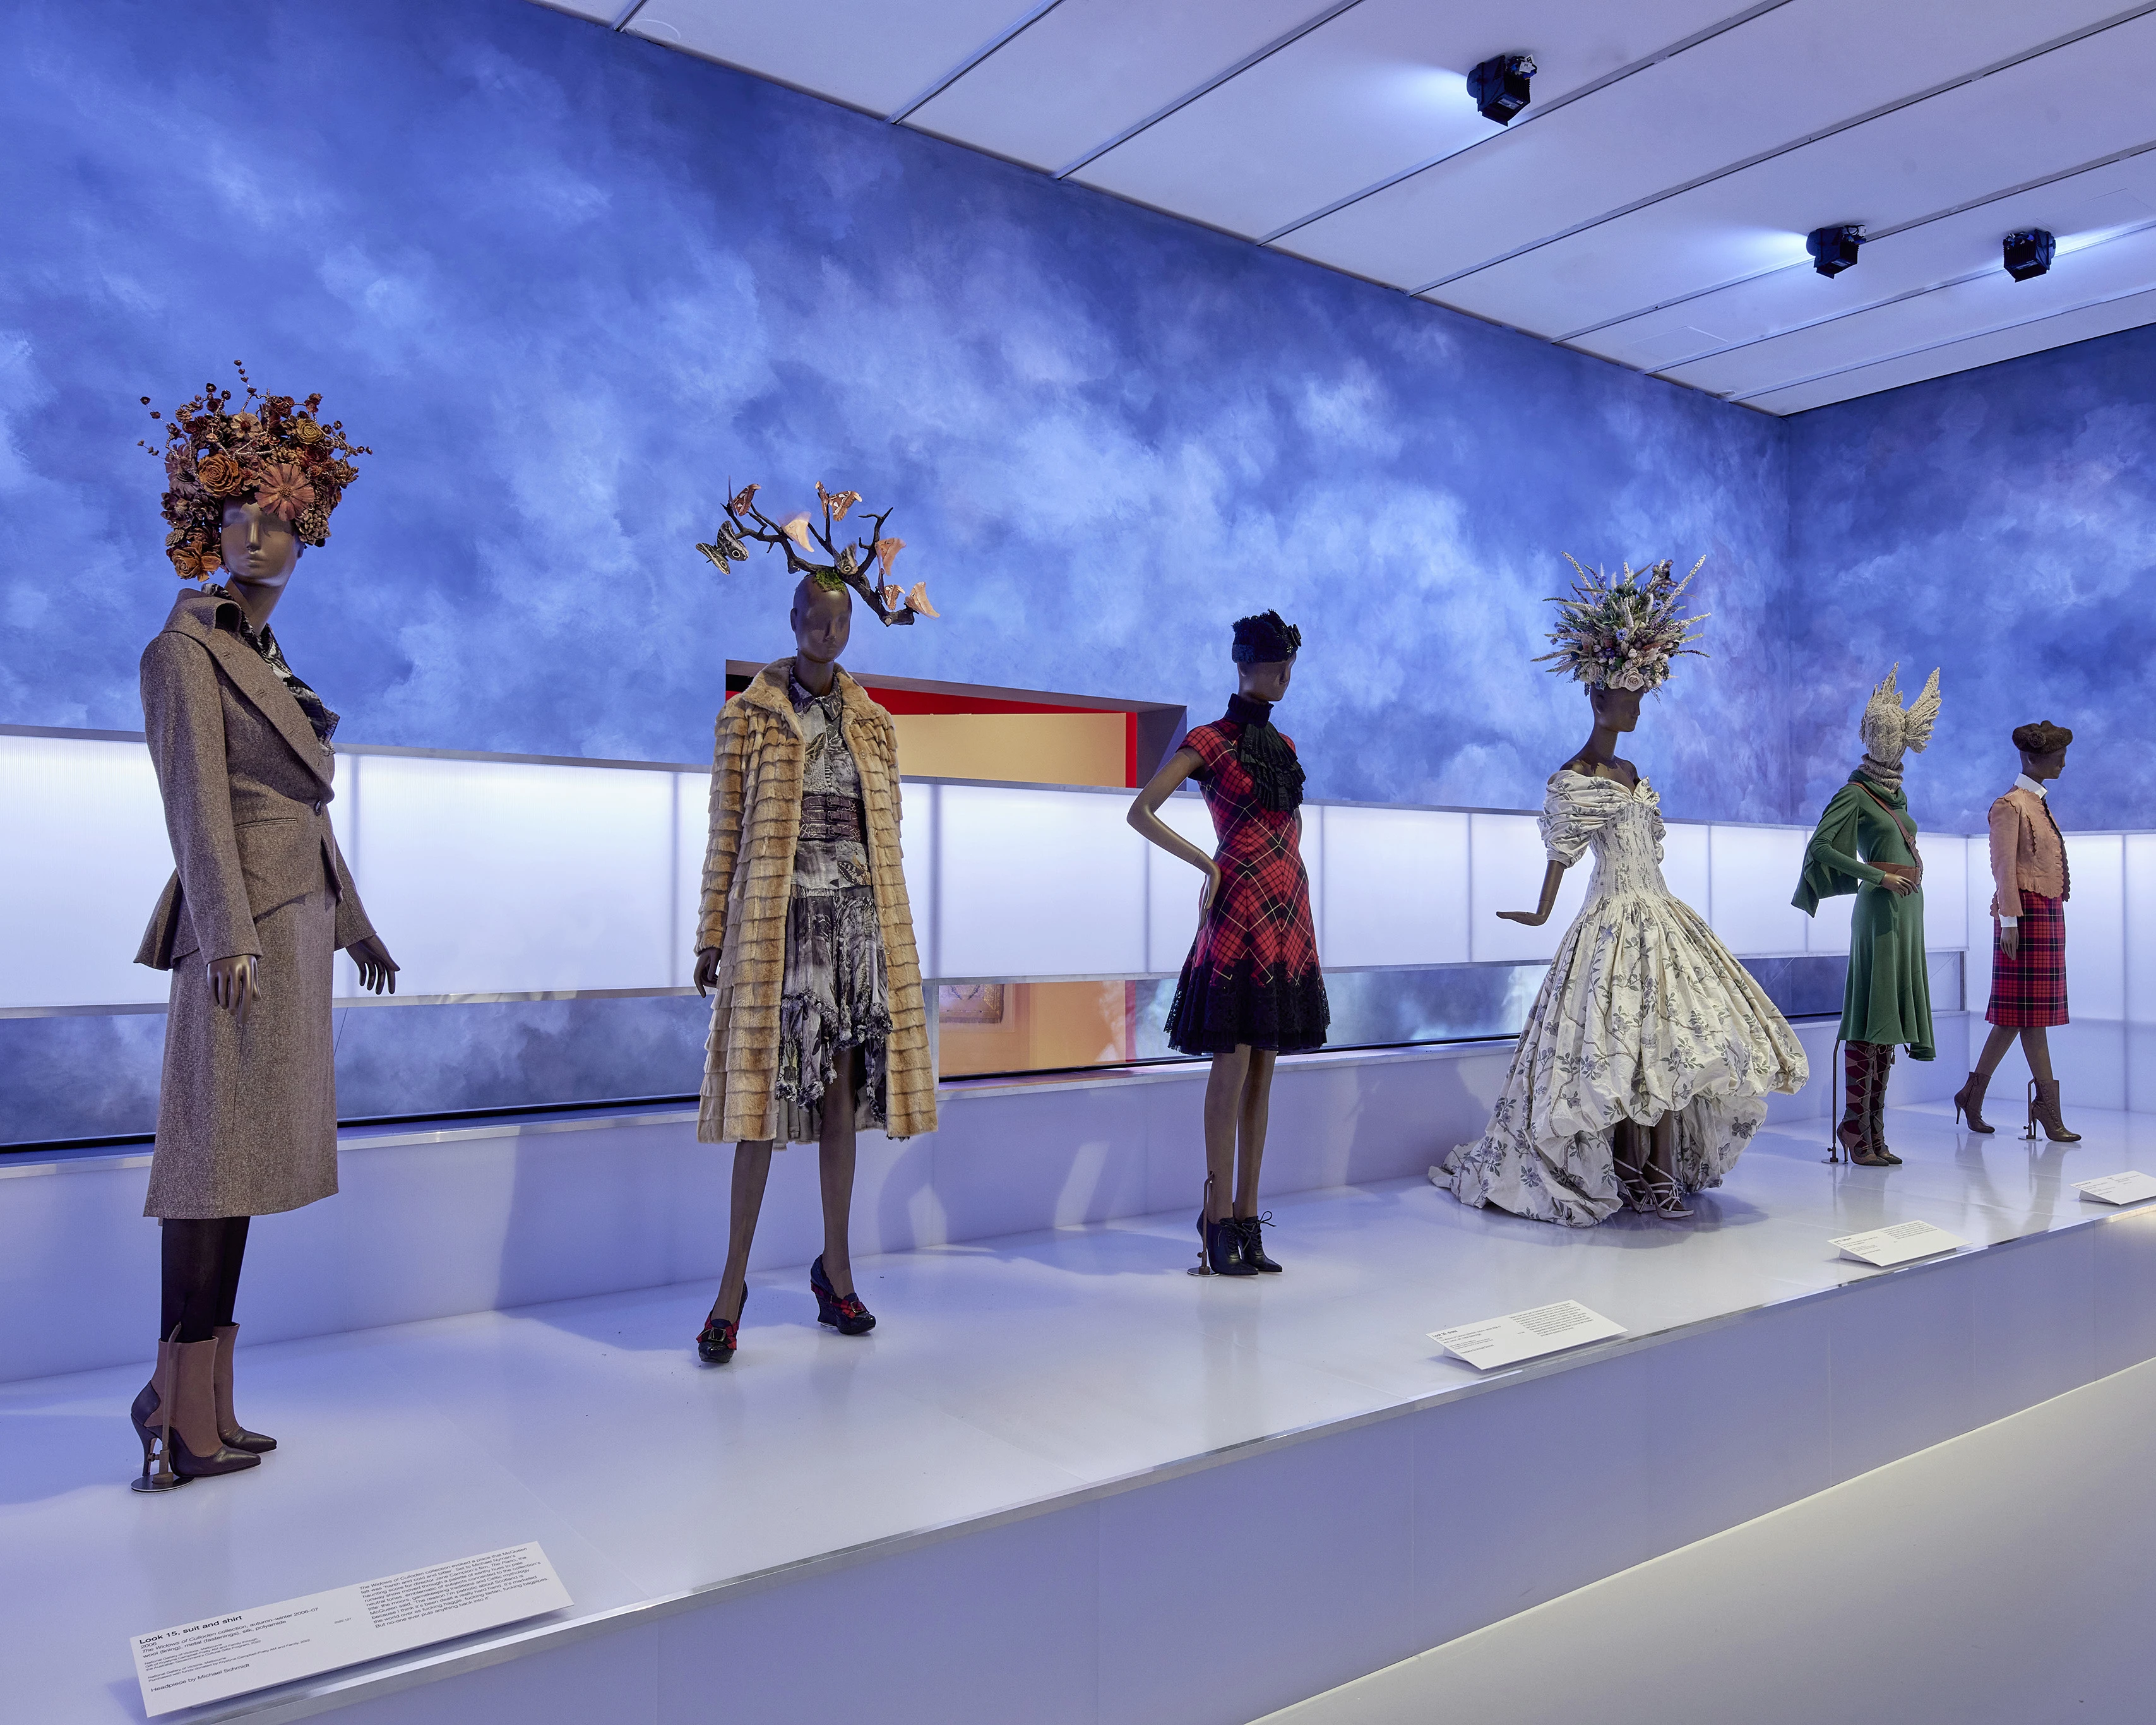 Alexander McQueen Installation at the National Gallery of Victoria with blue, cloudy background